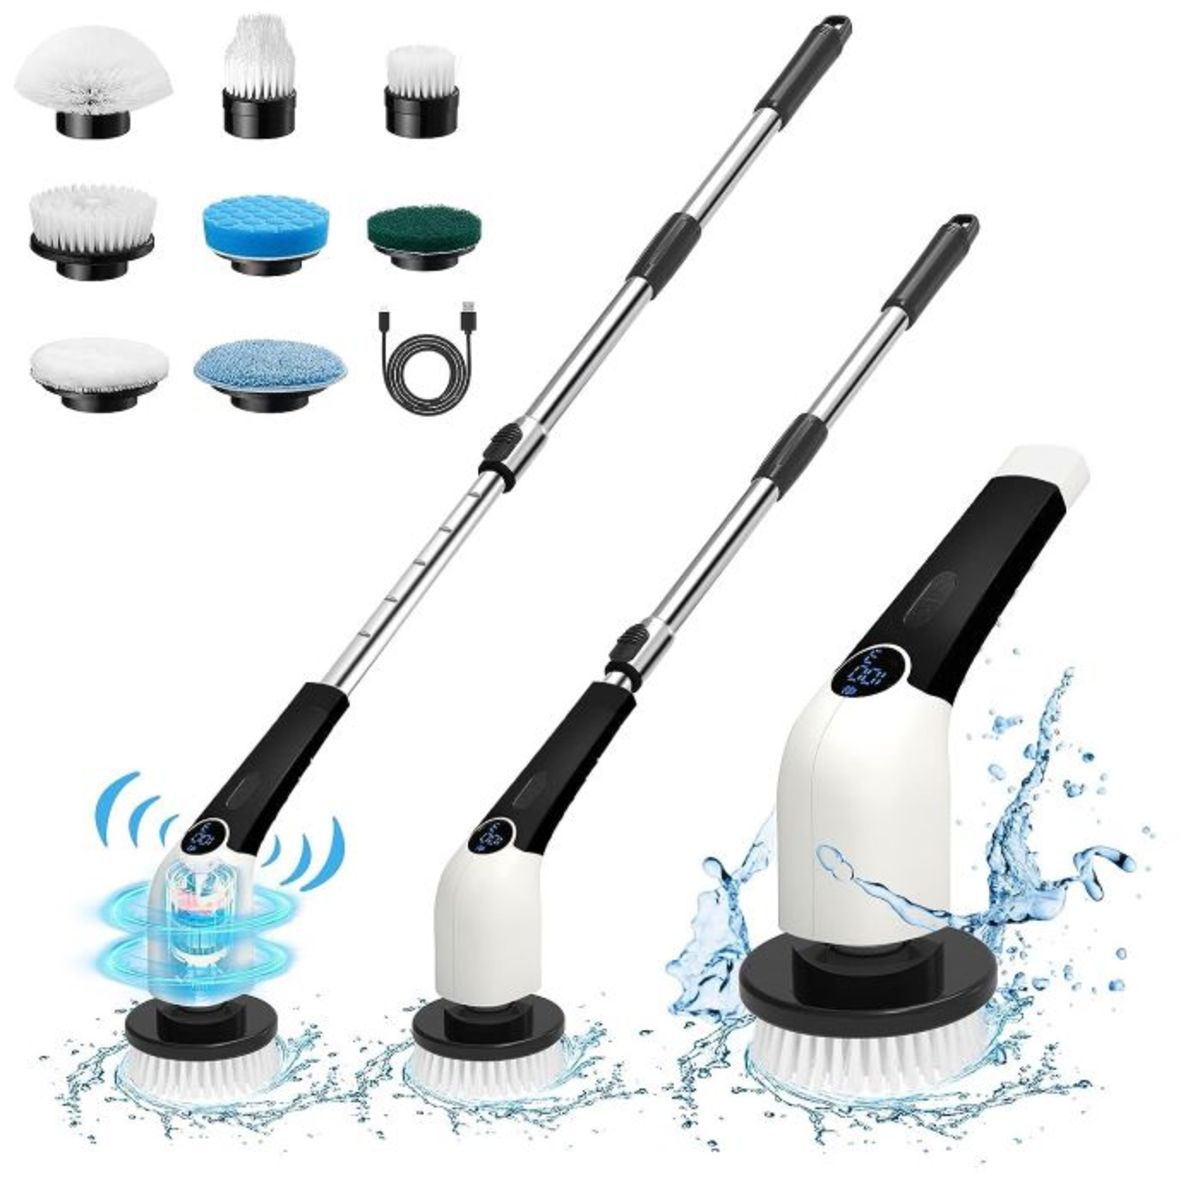 This versatile electric spin scrubber now just $40 at